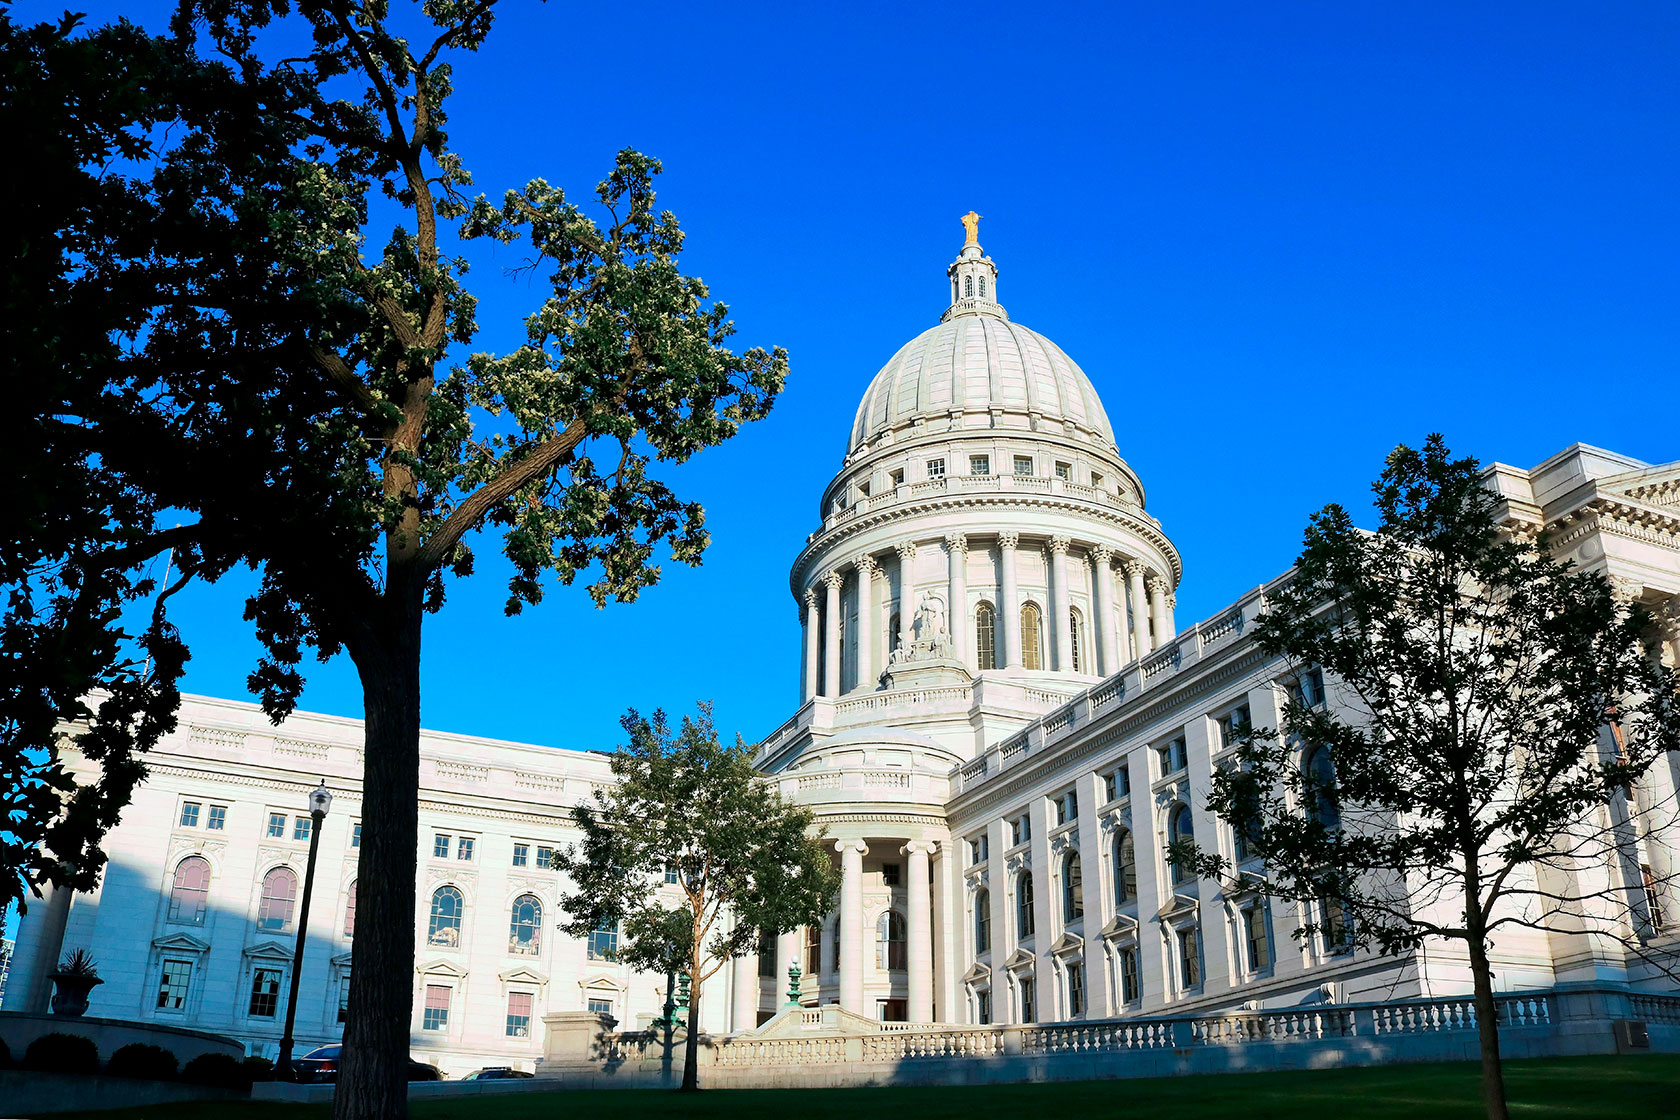 Photo shows the front view of the white Wisconsin Capitol building against a sunny blue sky, with a couple trees in the foreground